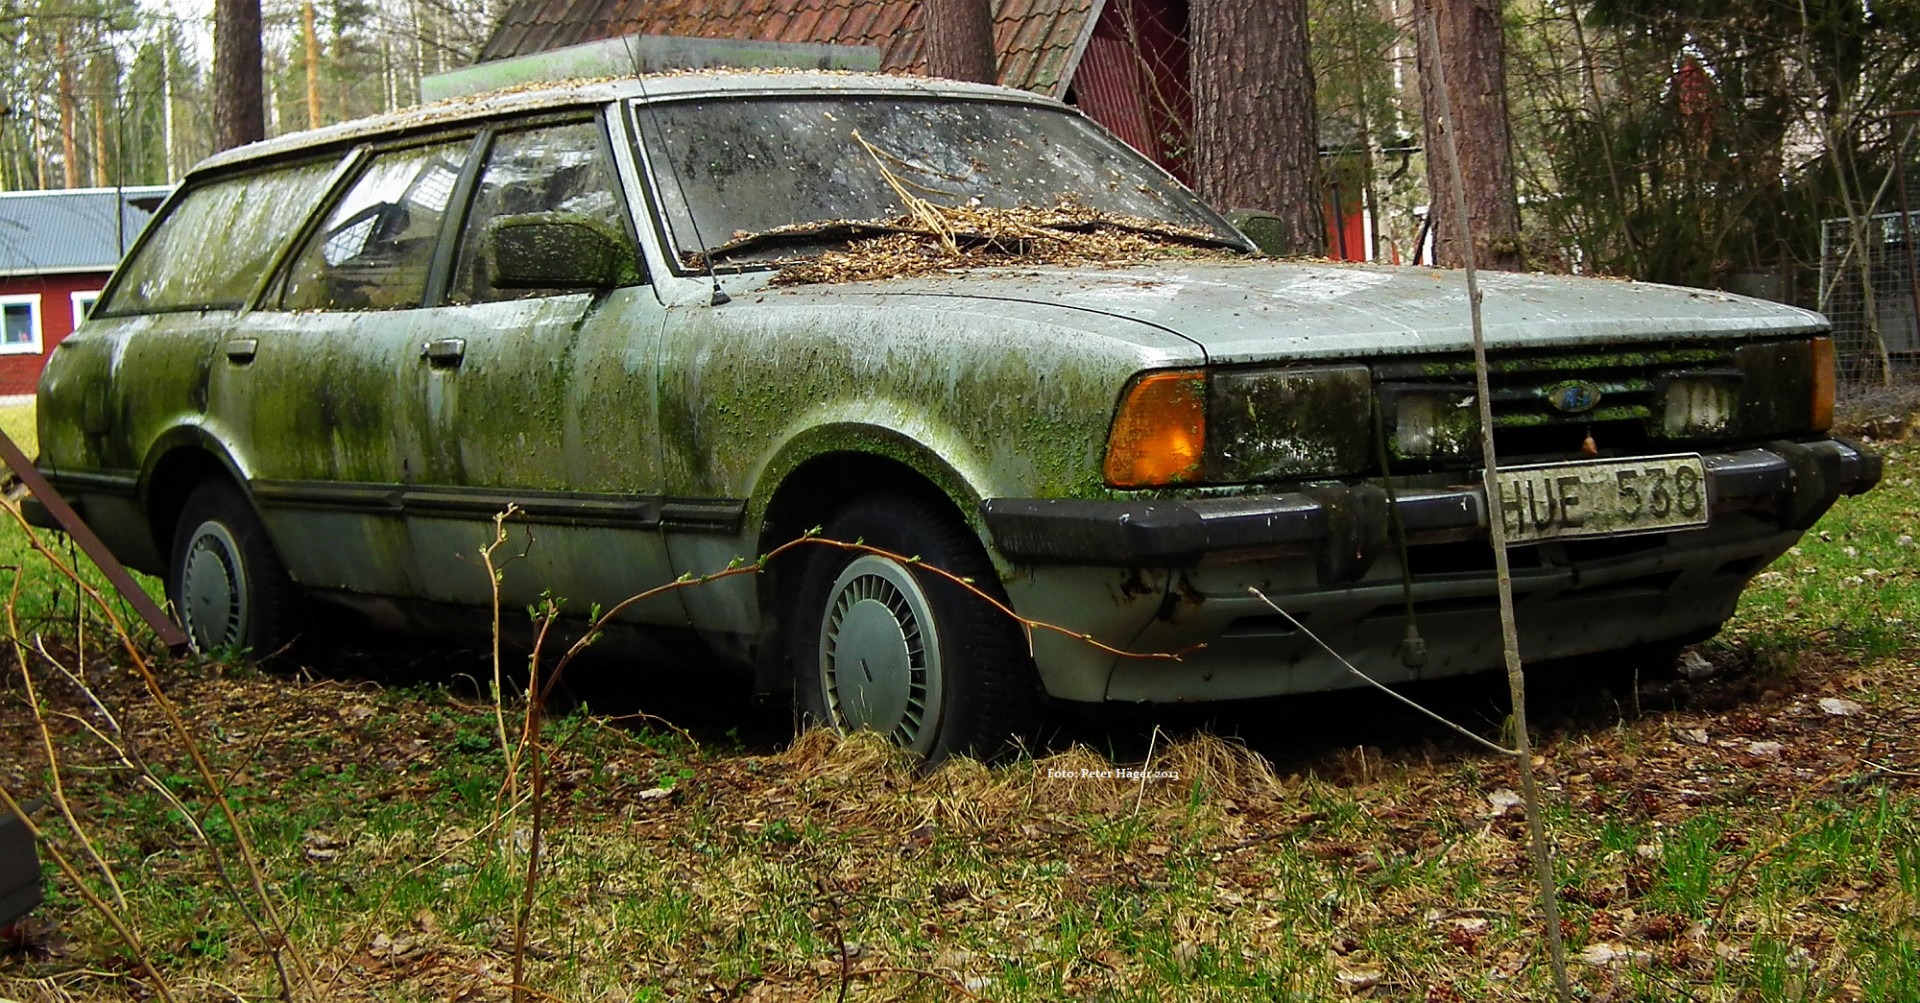 What is a Reasonable Price for My Junk Car?